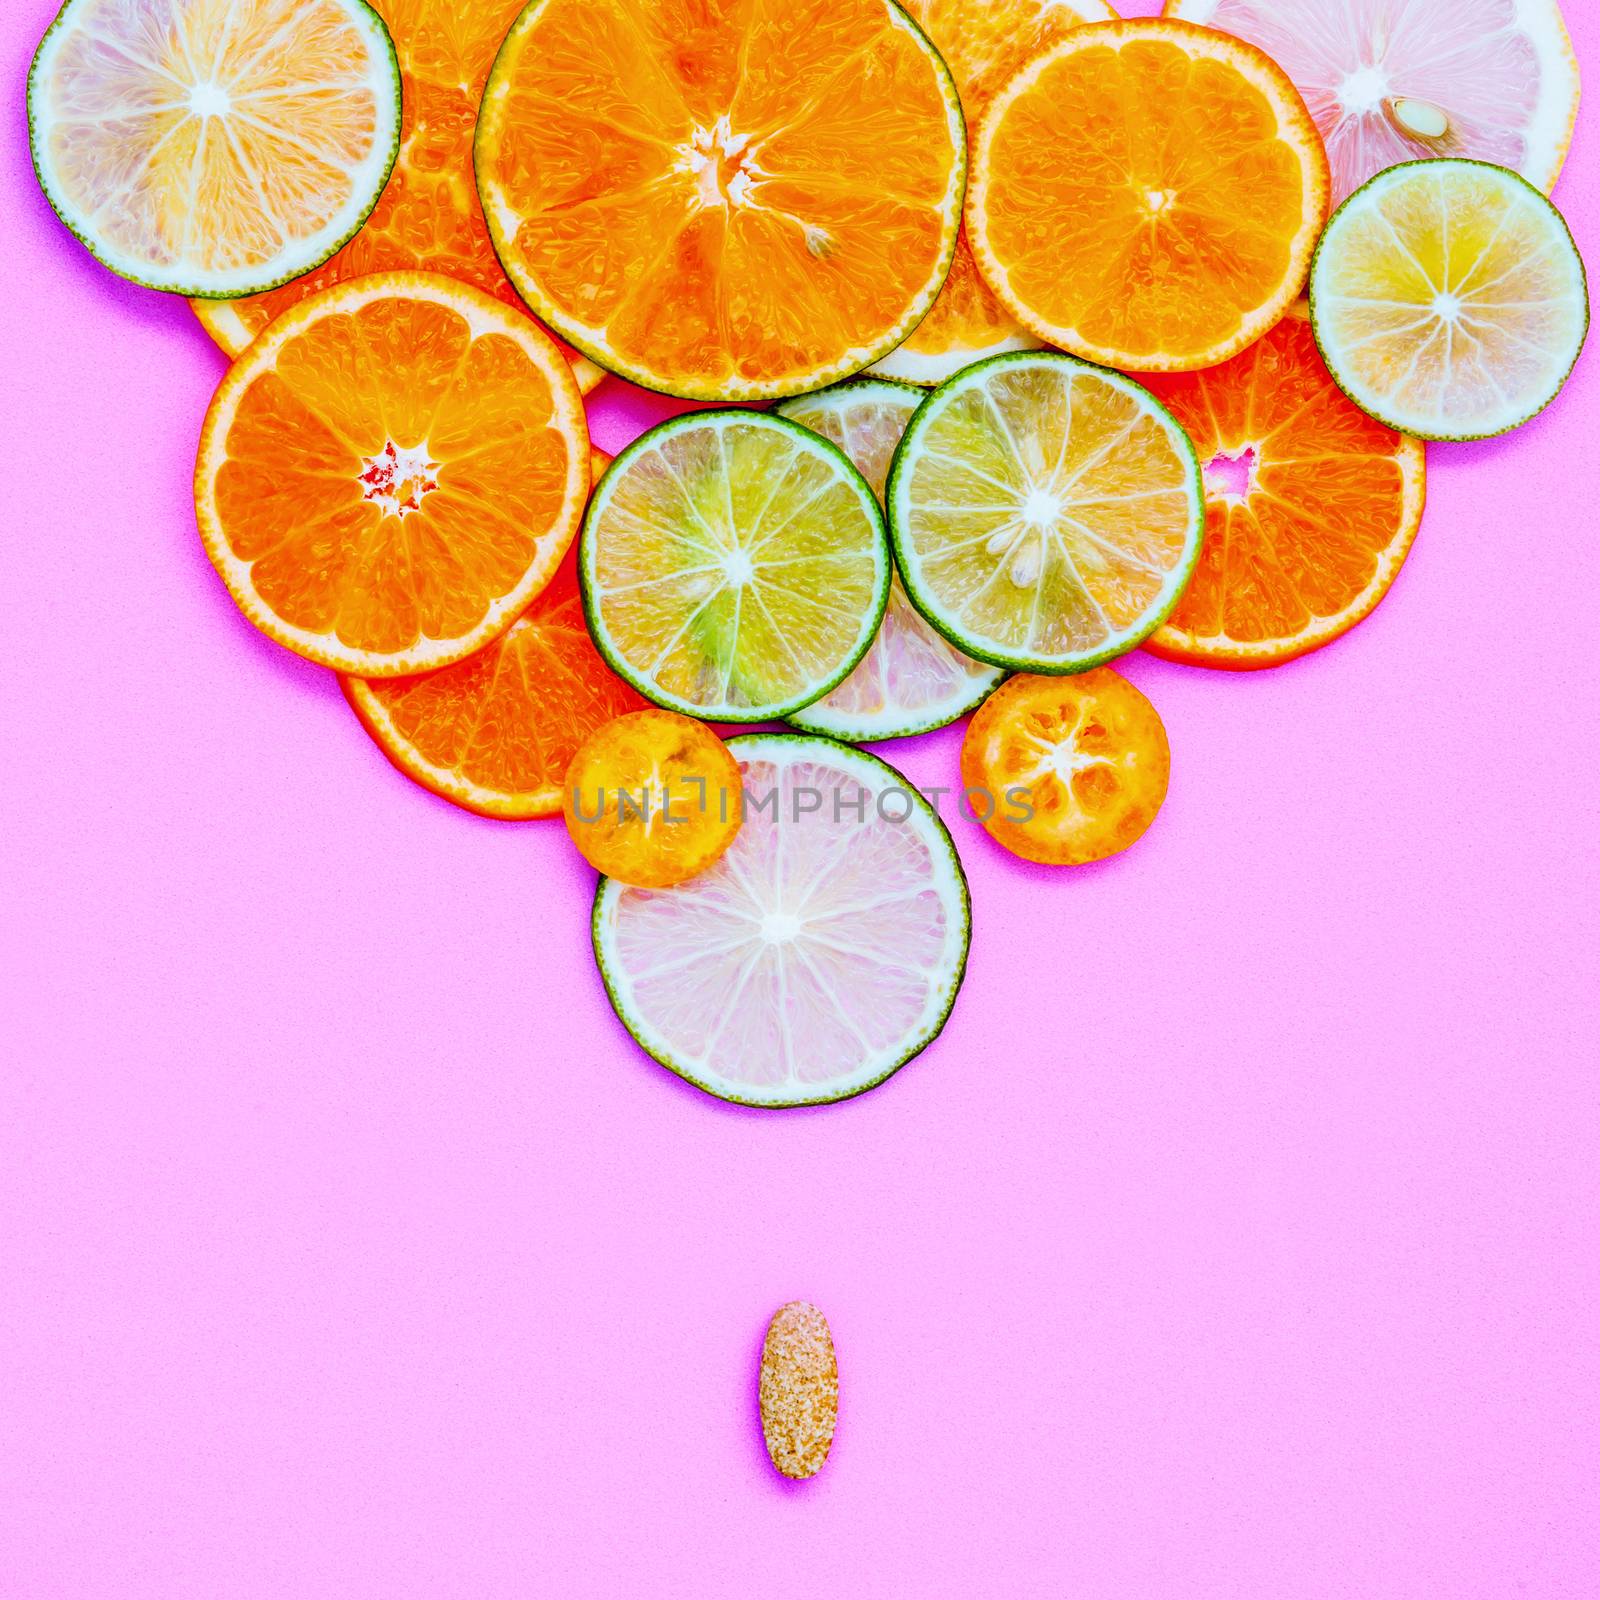 Healthy foods and medicine concept. Pill of vitamin C and various citrus fruits. Citrus fruits sliced lime,orange ,kumquat and lemon on light pink background flat lay.